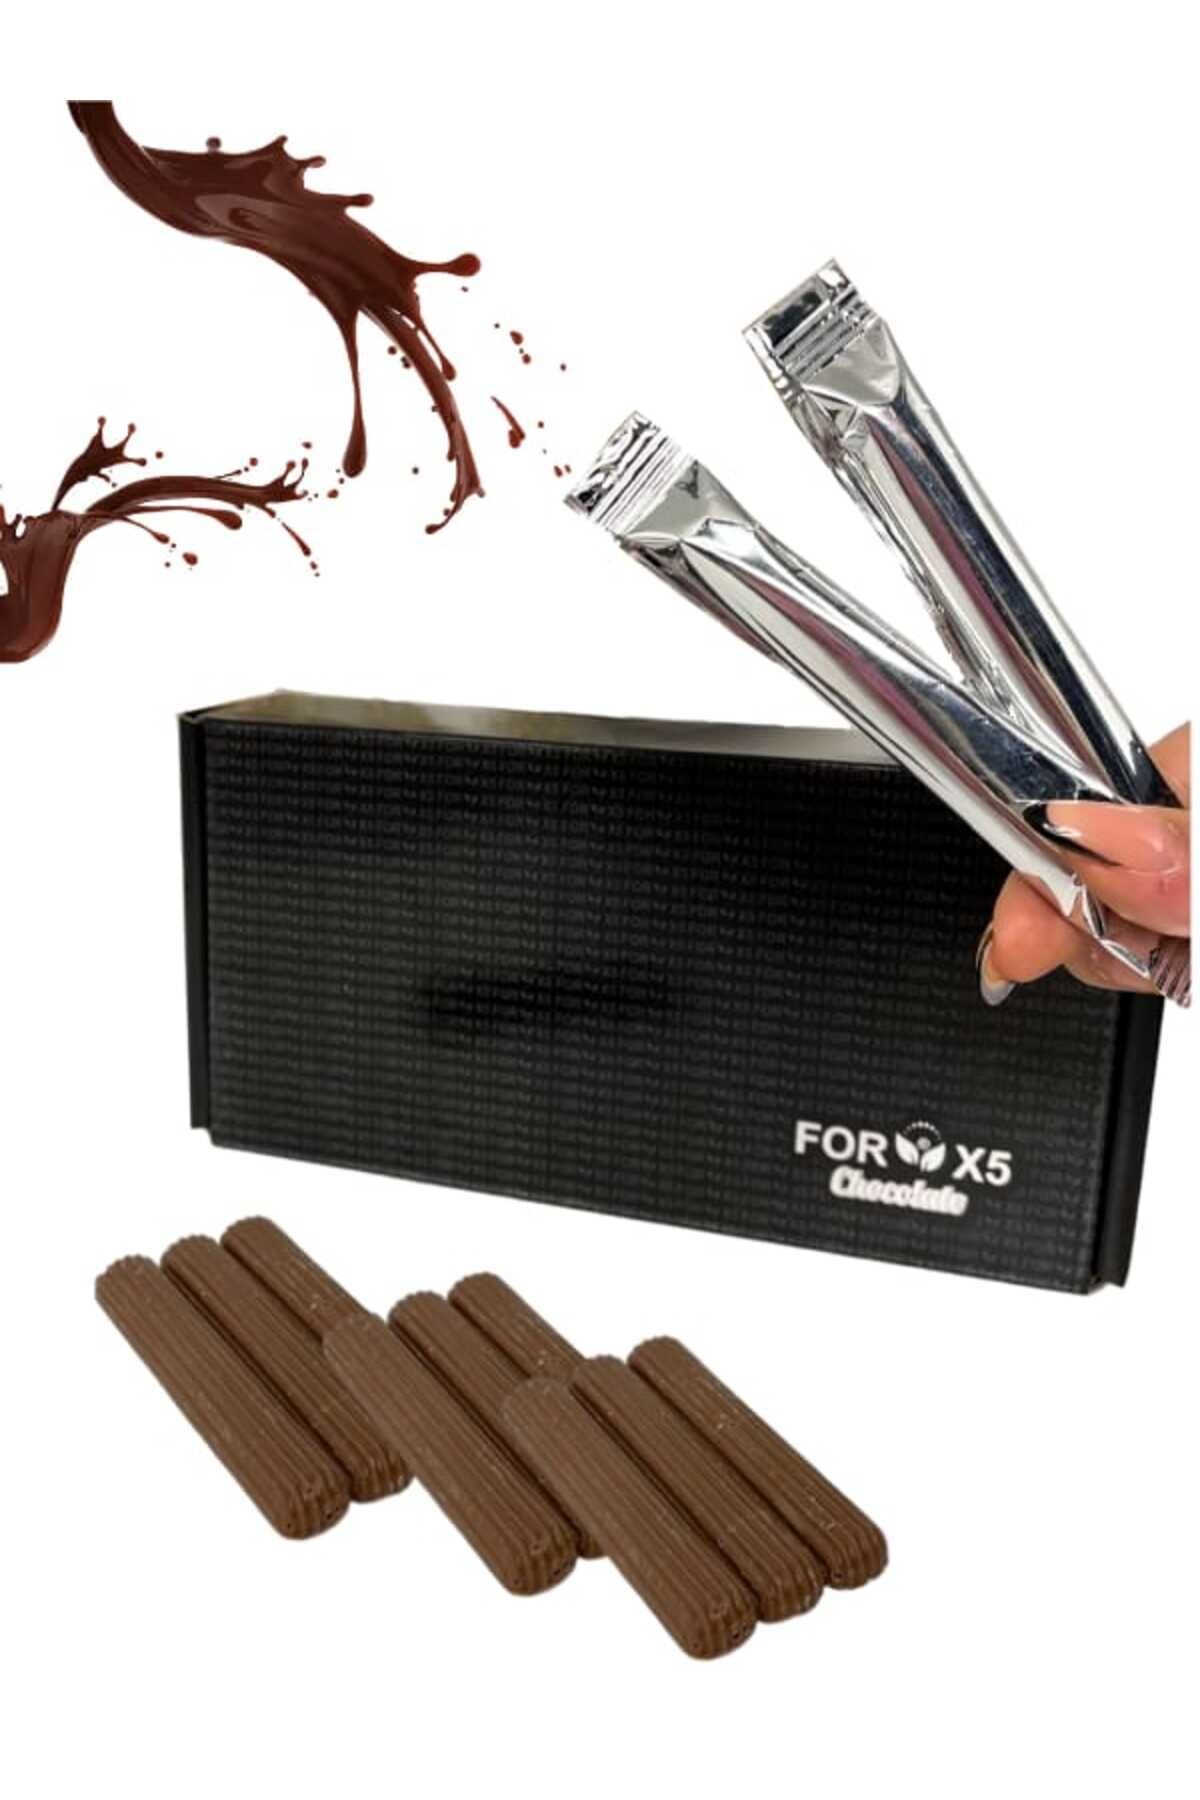 FORX5 Chocolate